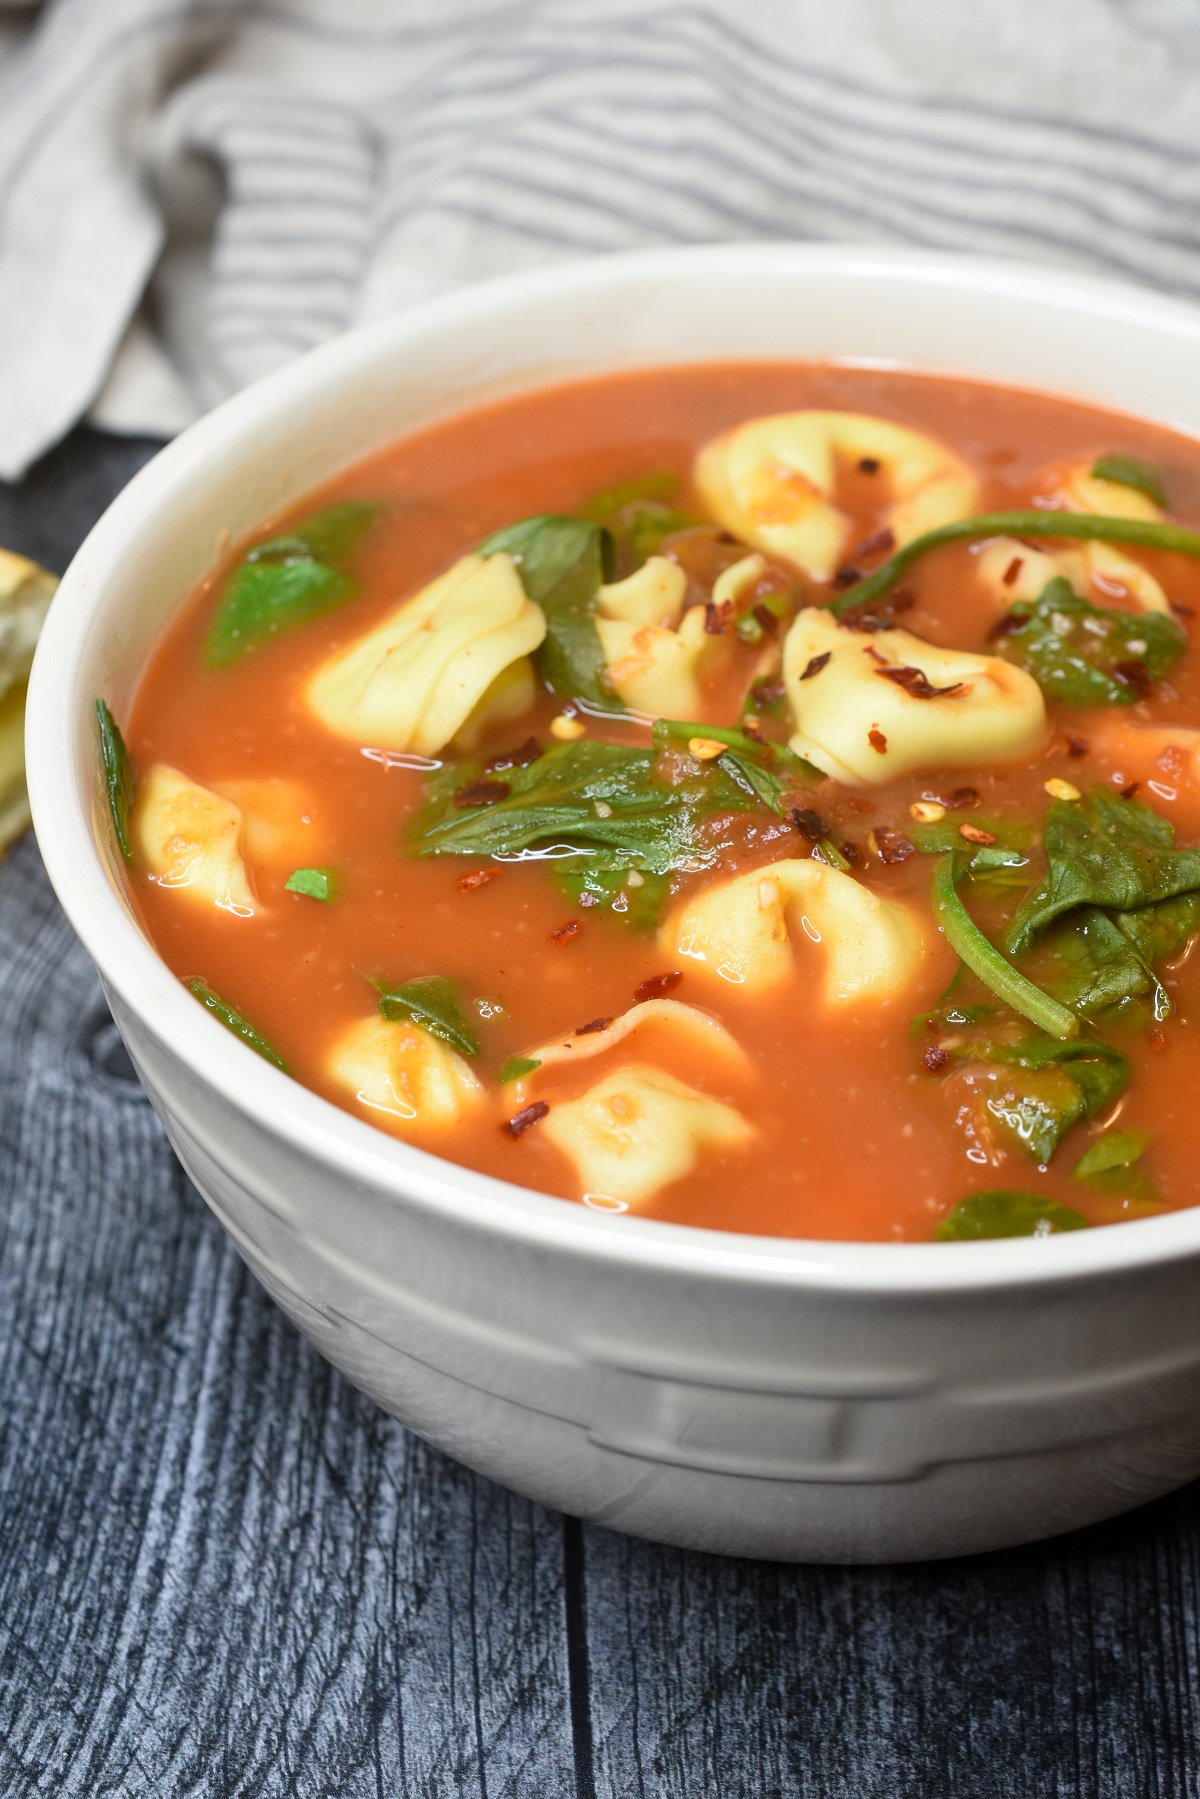 Tortellini Spinach Soup Recipe. Make this super flavorful family favorite recipe in 15 minutes!